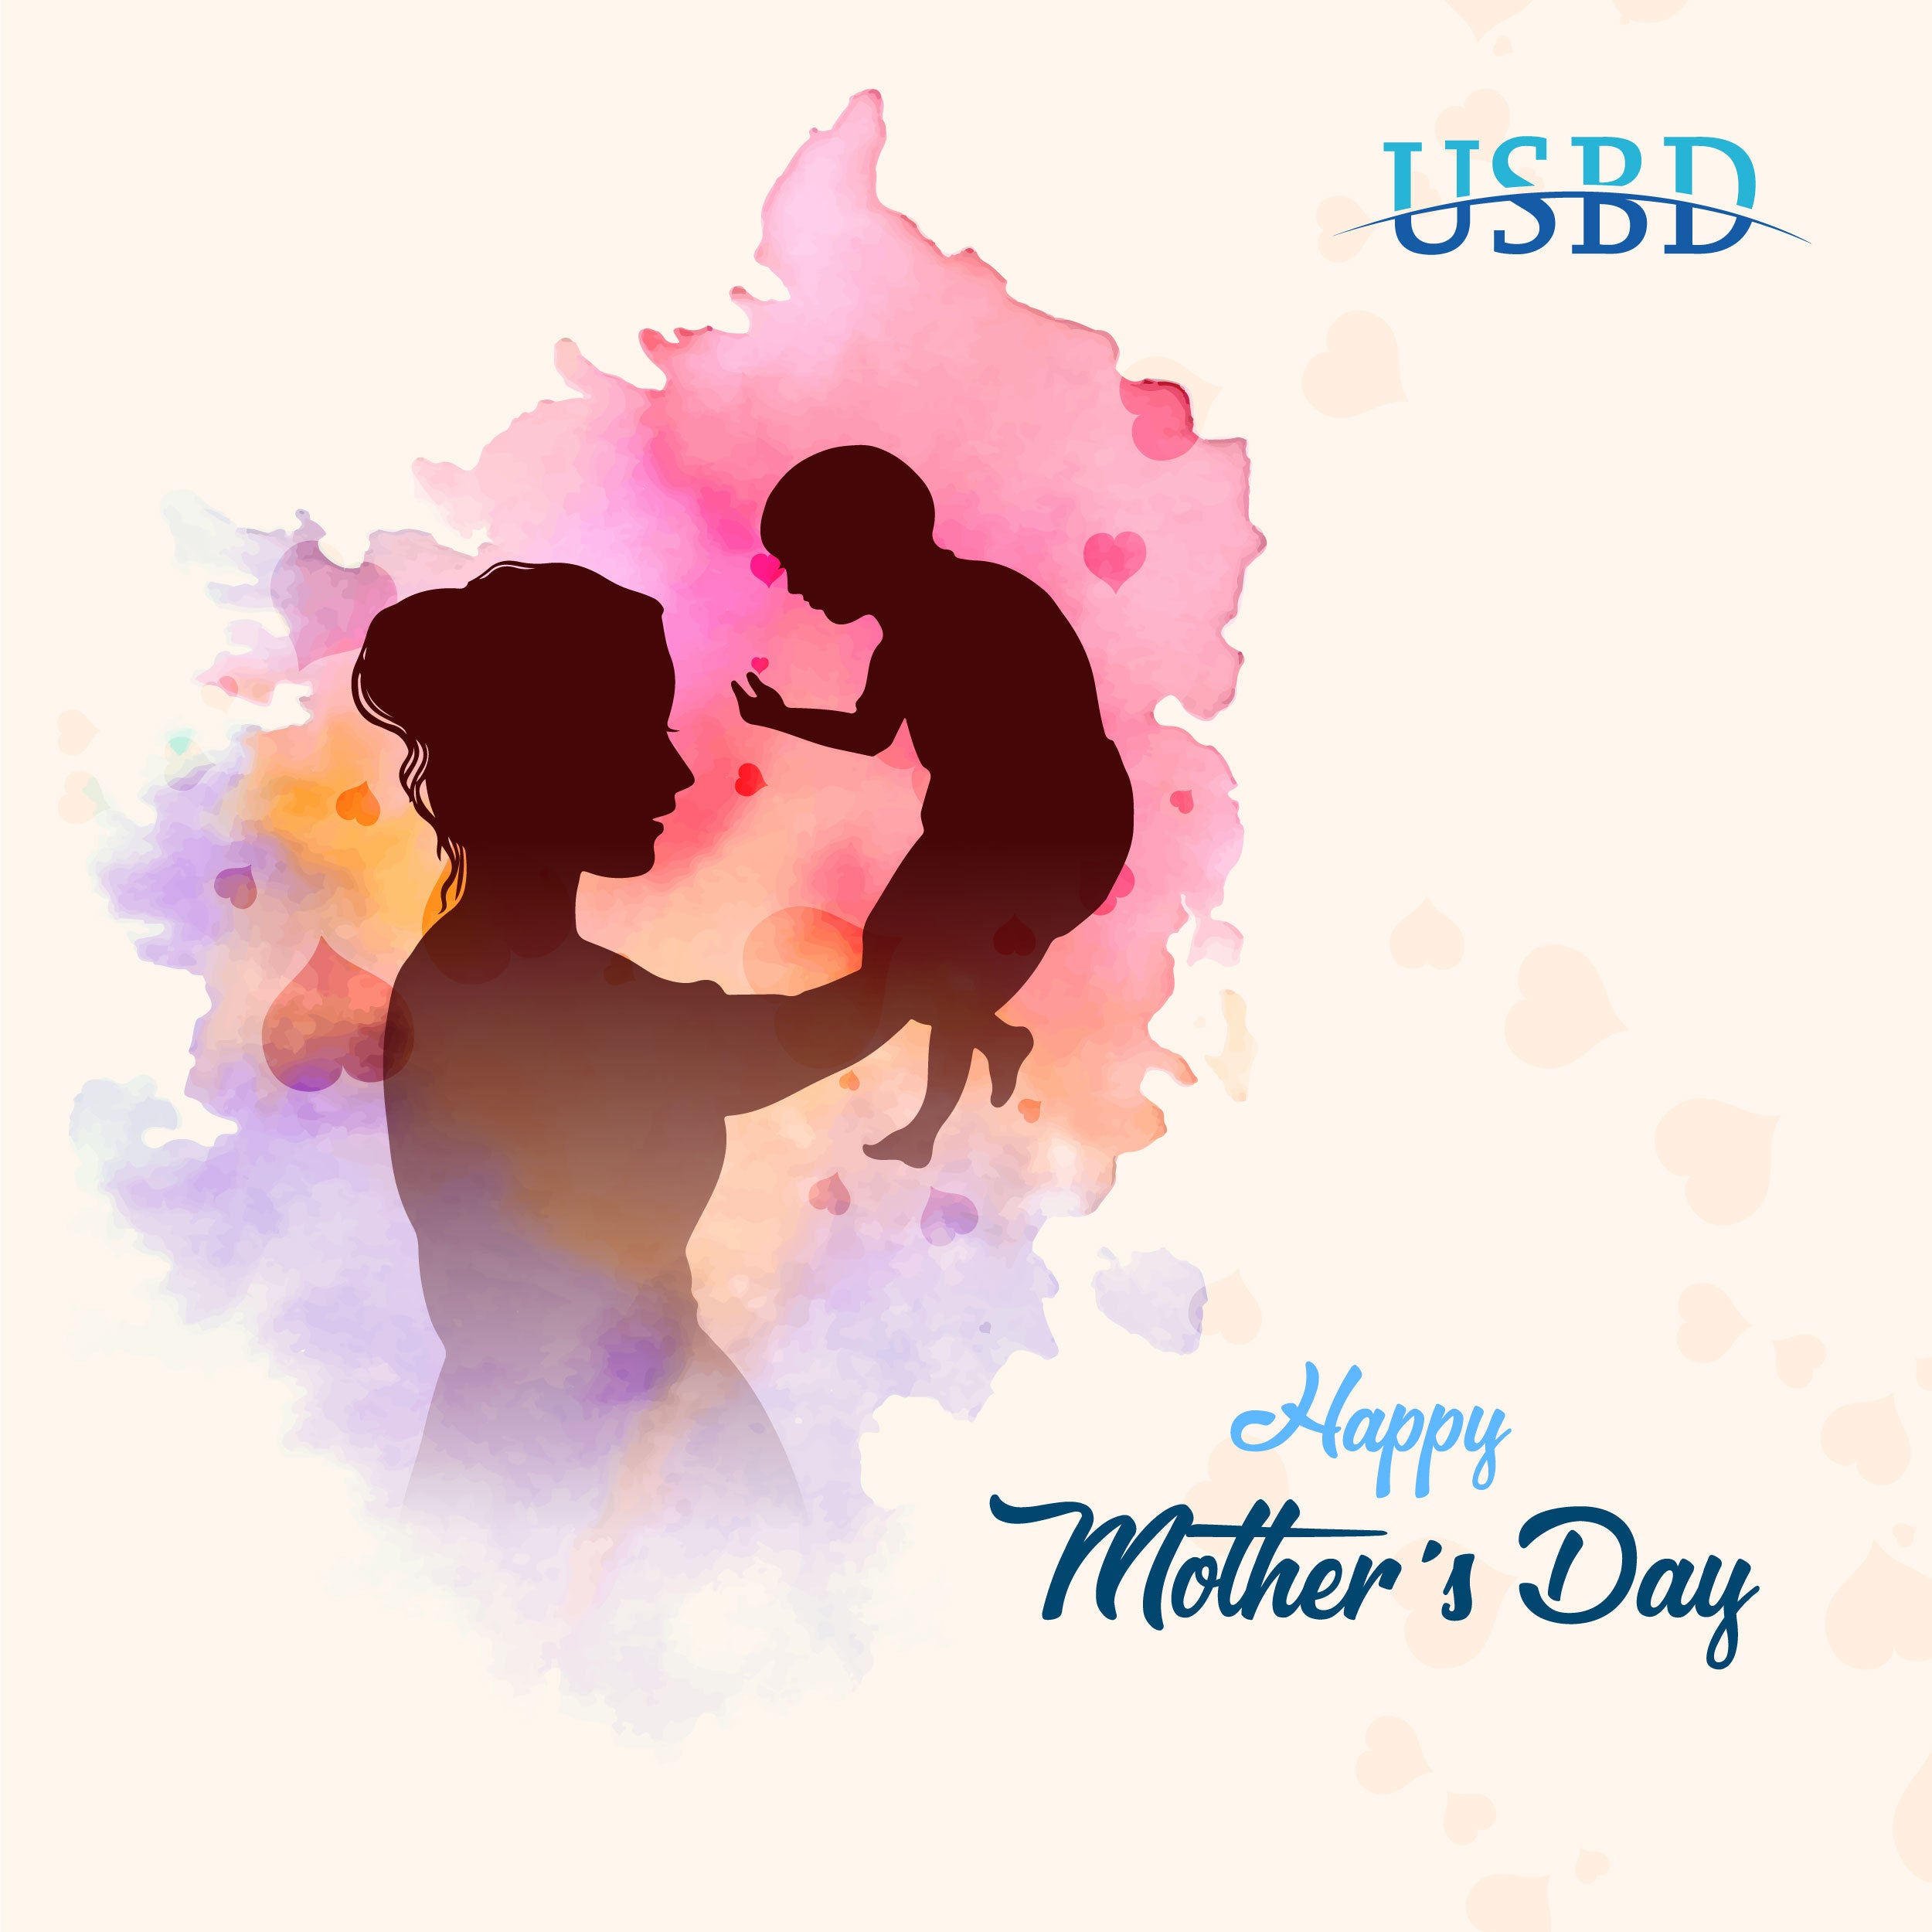 Celebrating Mother's Day: A Tribute to Unconditional Love